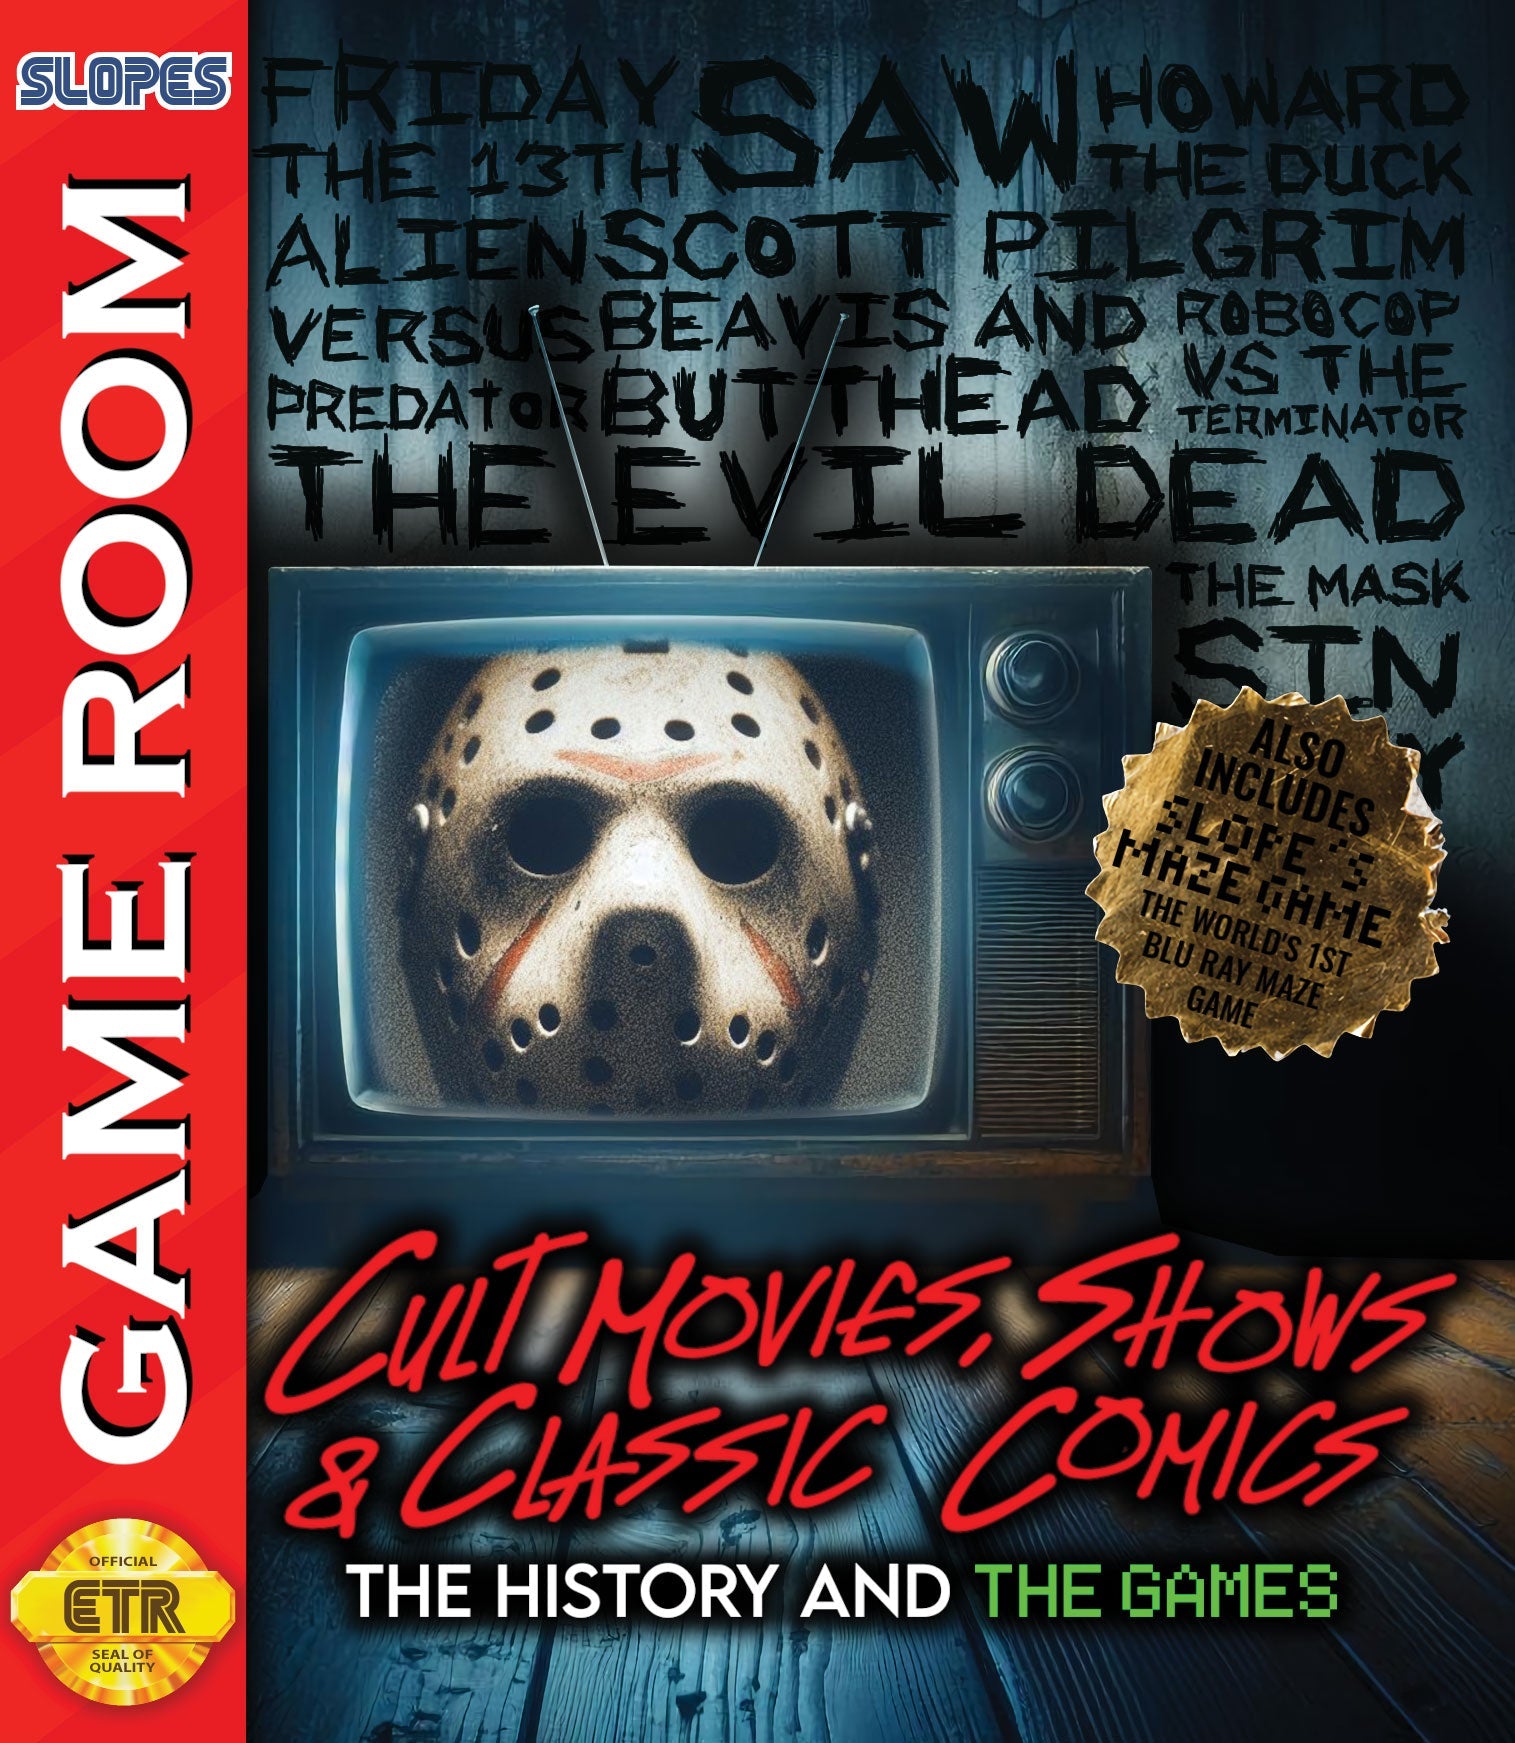 SLOPE'S GAME ROOM: CULT MOVIES, SHOWS AND CLASSIC COMICS (LIMITED EDITION) BLU-RAY [PRE-ORDER]